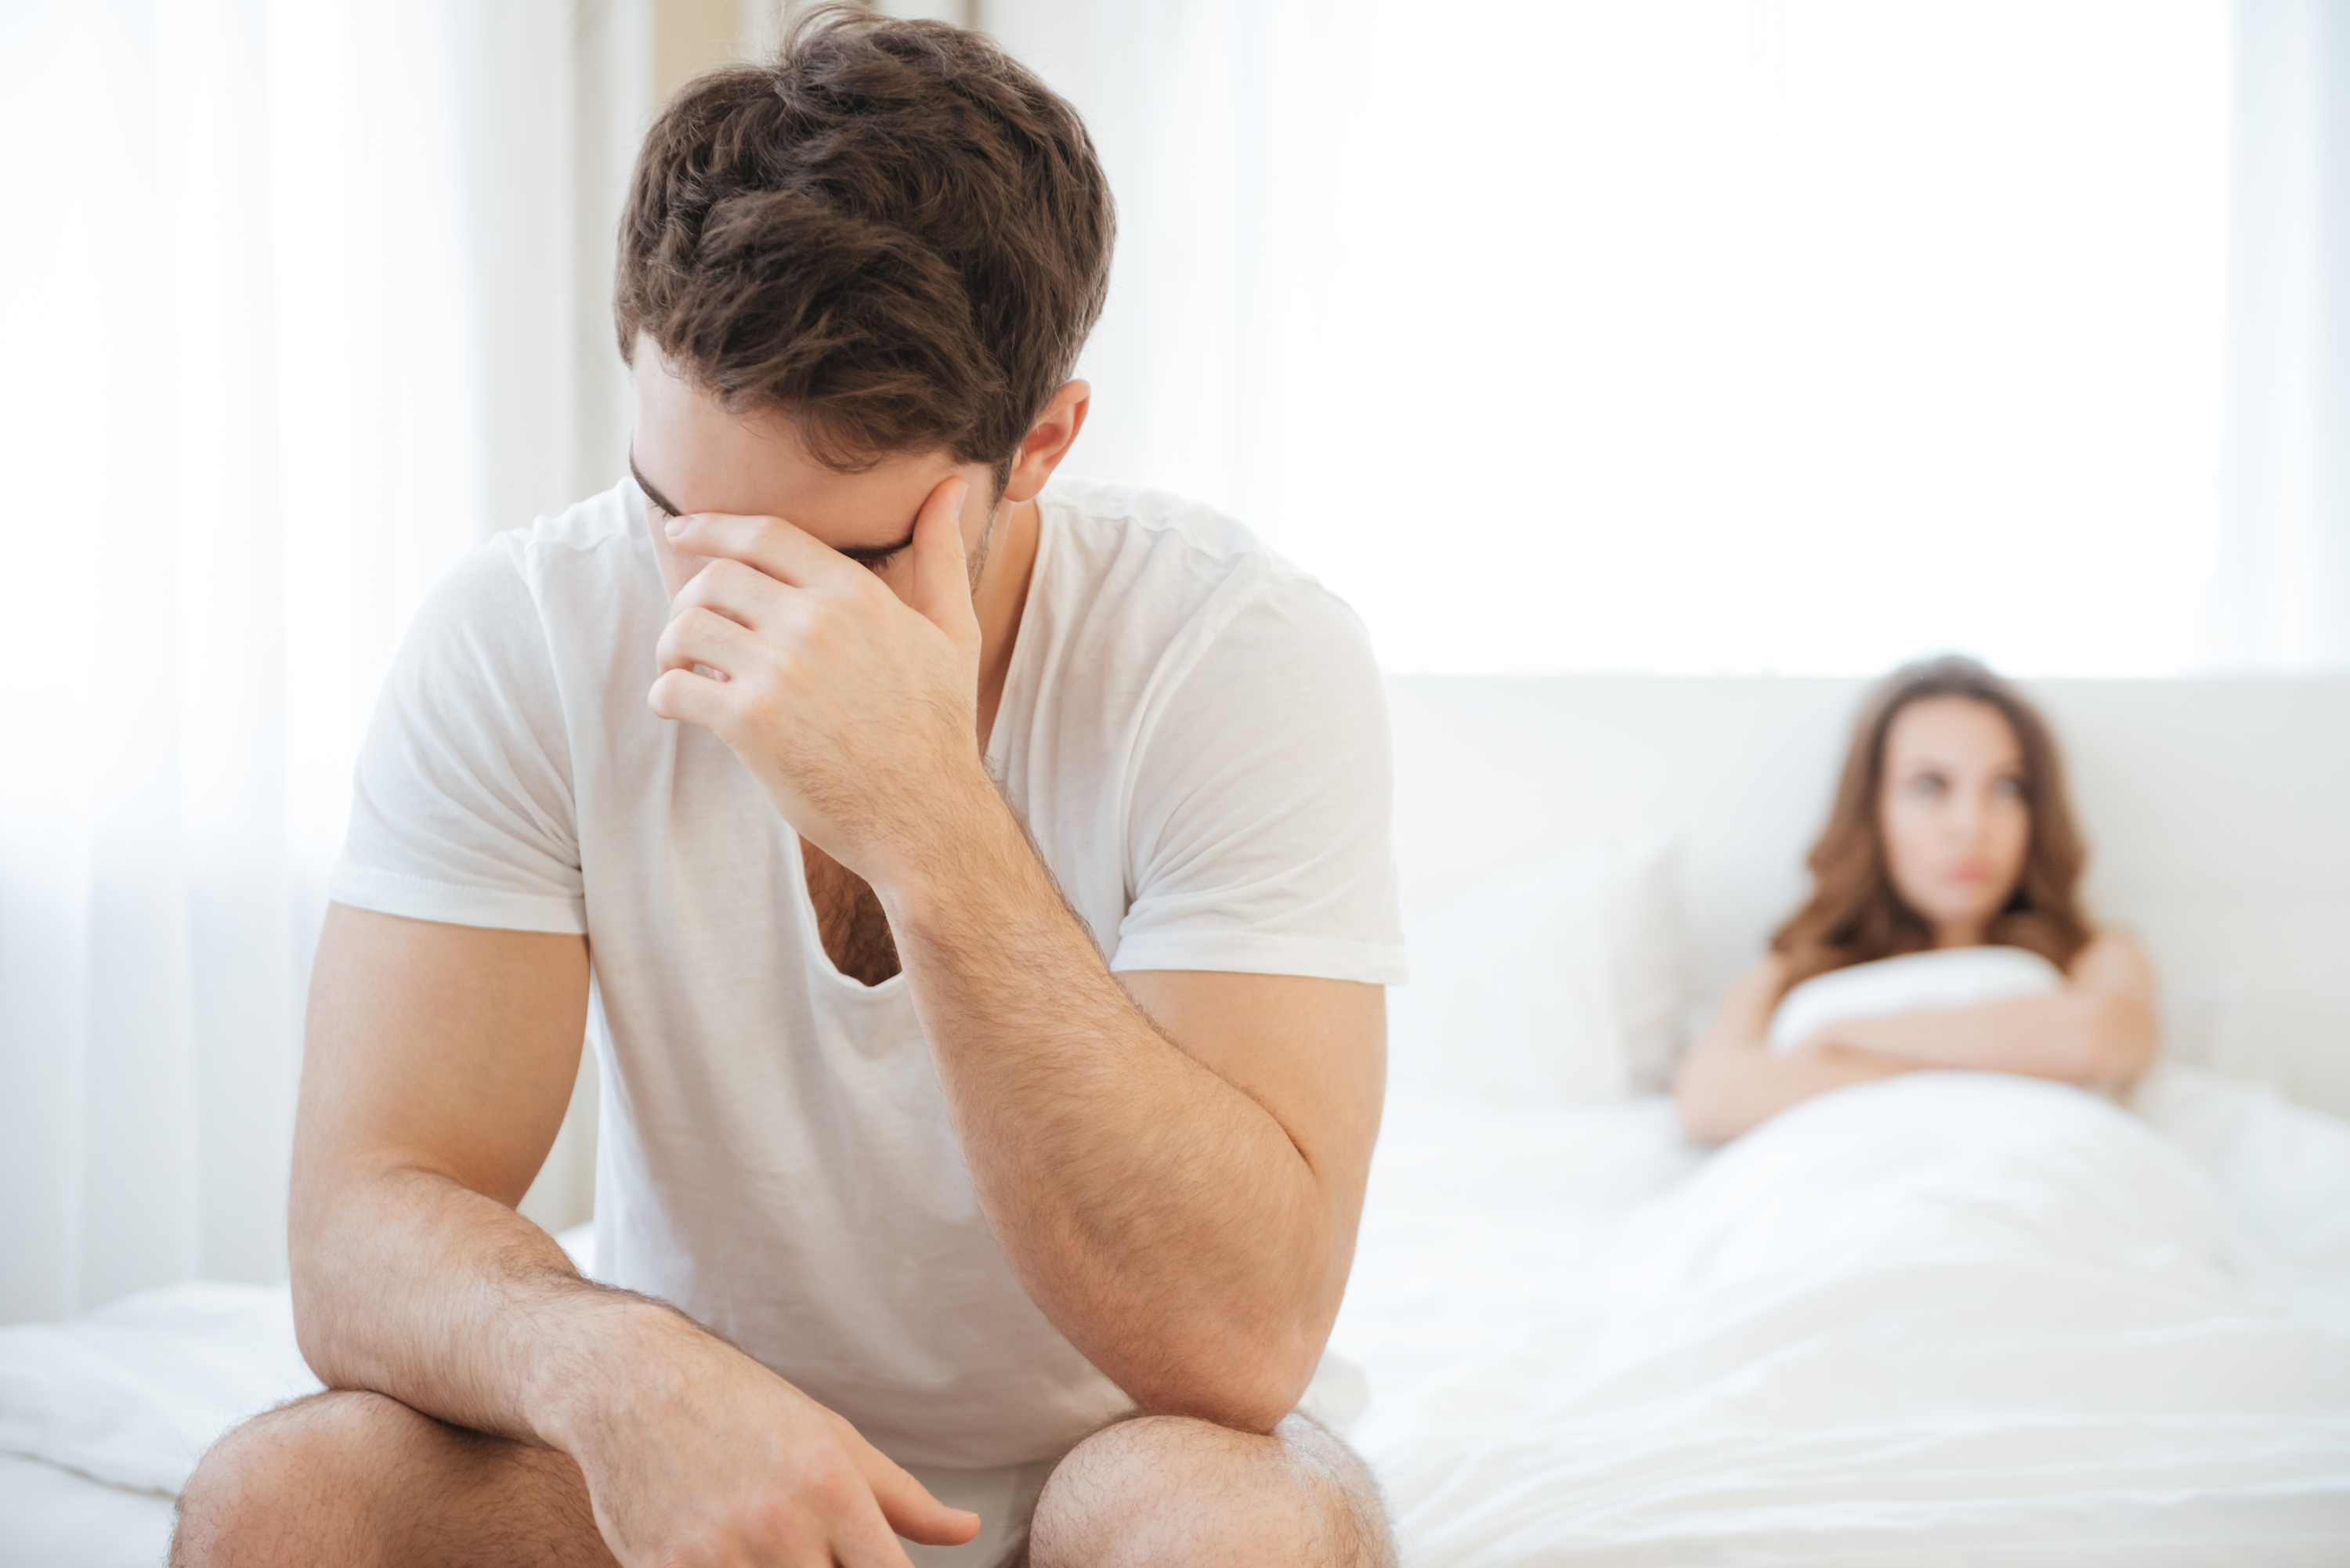 Astonishing Causes of Male Impotence